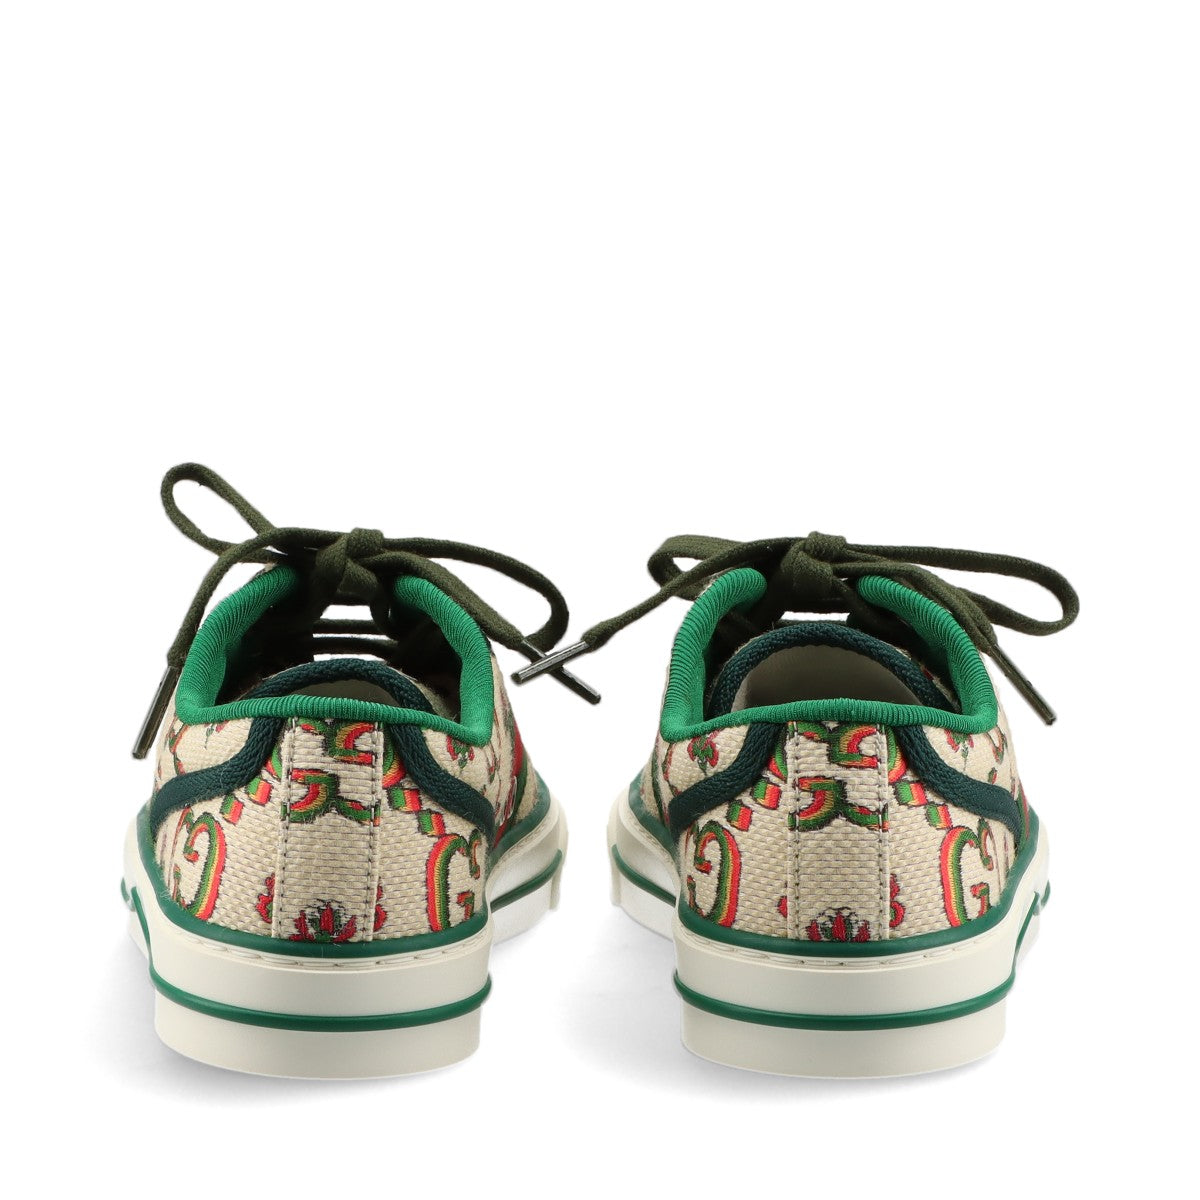 Gucci Tennis 1977 canvas Sneakers 35.5 Ladies' Multicolor GG Supreme Flower 100th anniversary Replaceable cord Box There is a storage bag